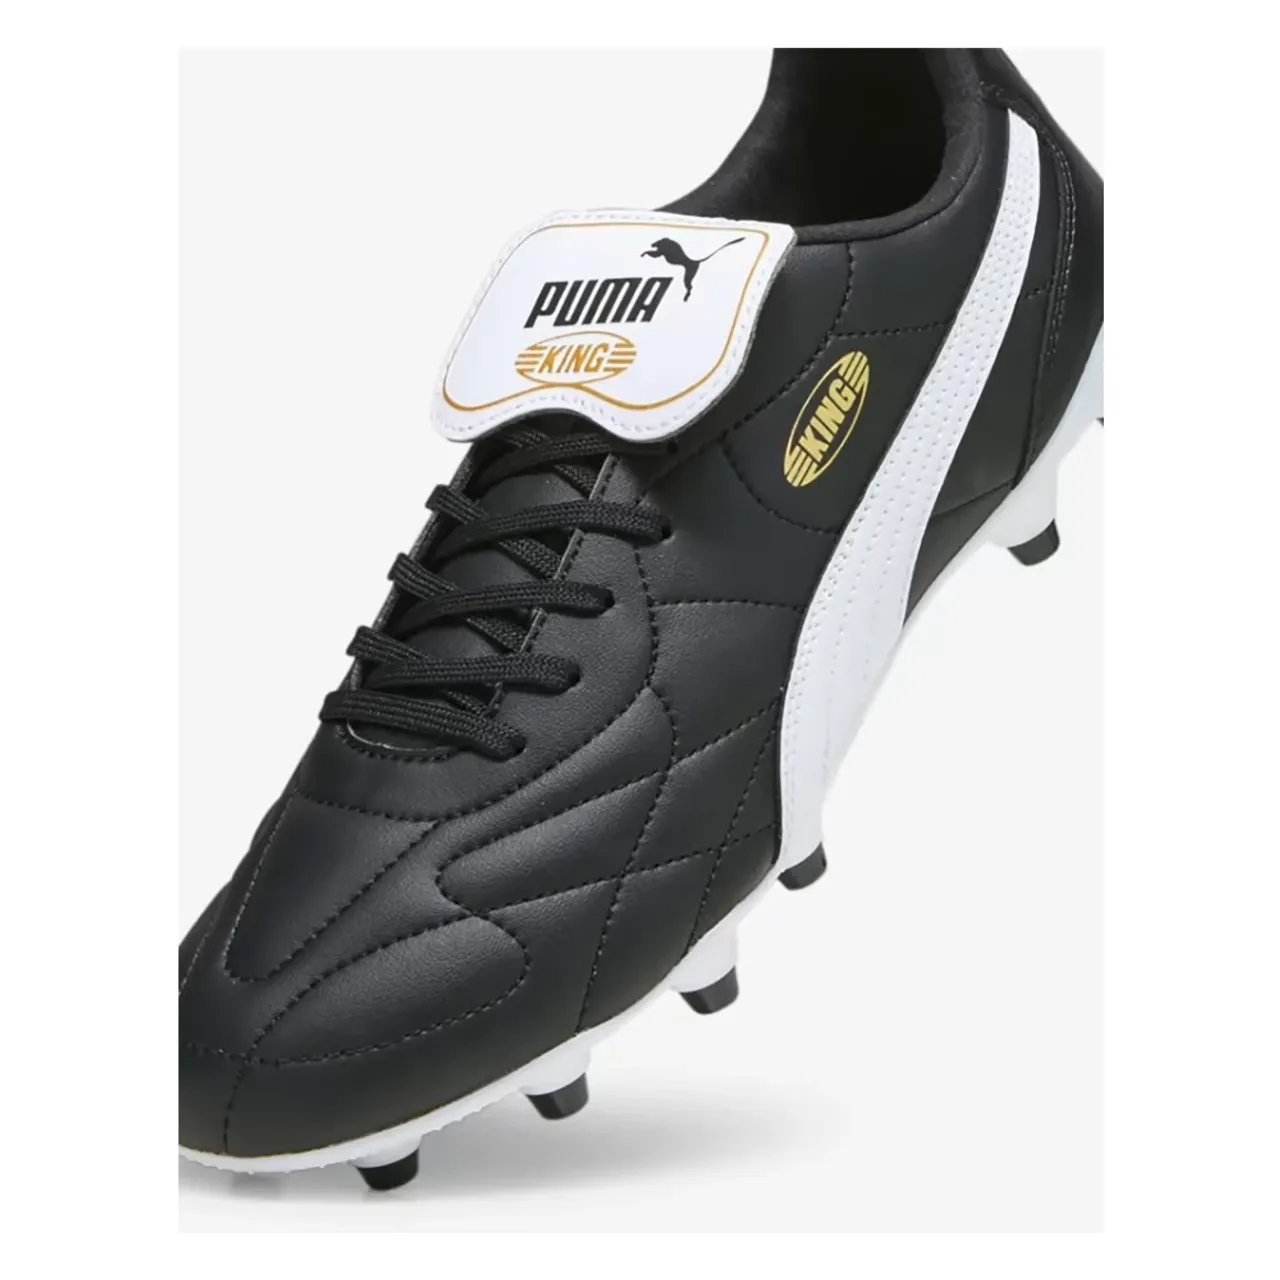 Puma , King Top Fg-Ag Soccer Cleats ,Black male, Sizes: